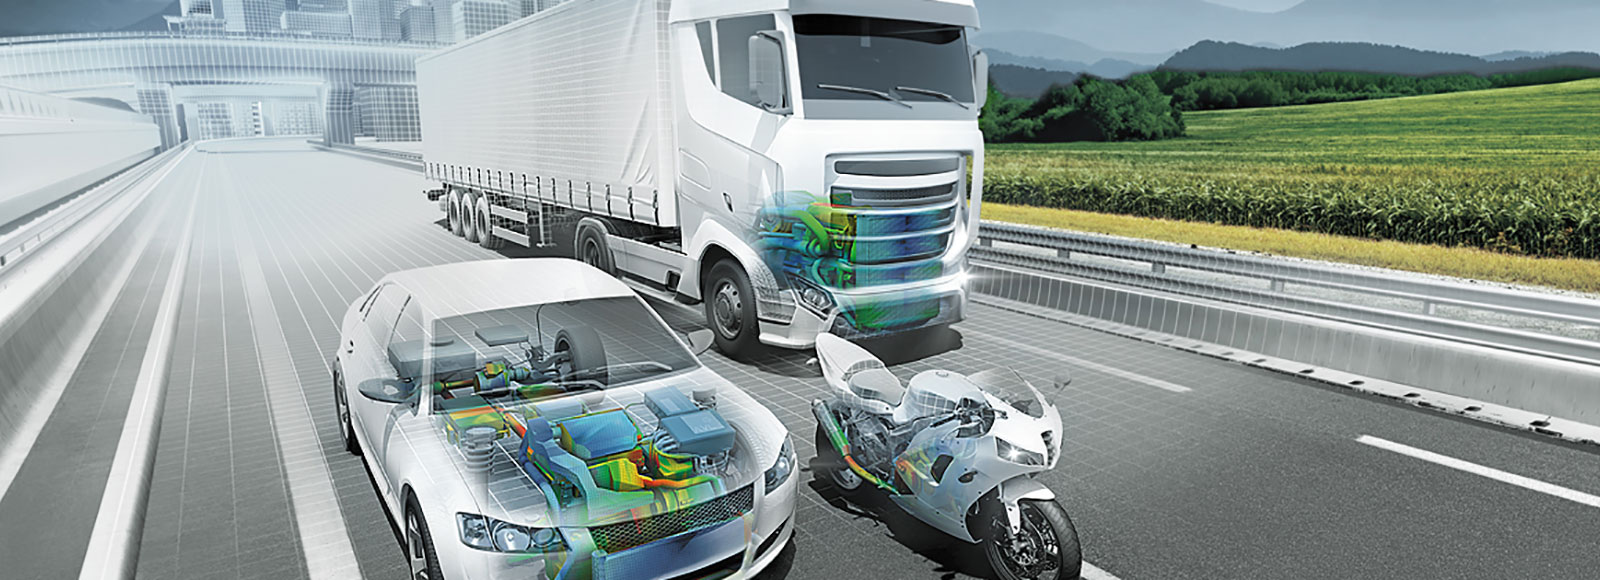 depiction of vehicle simulation software